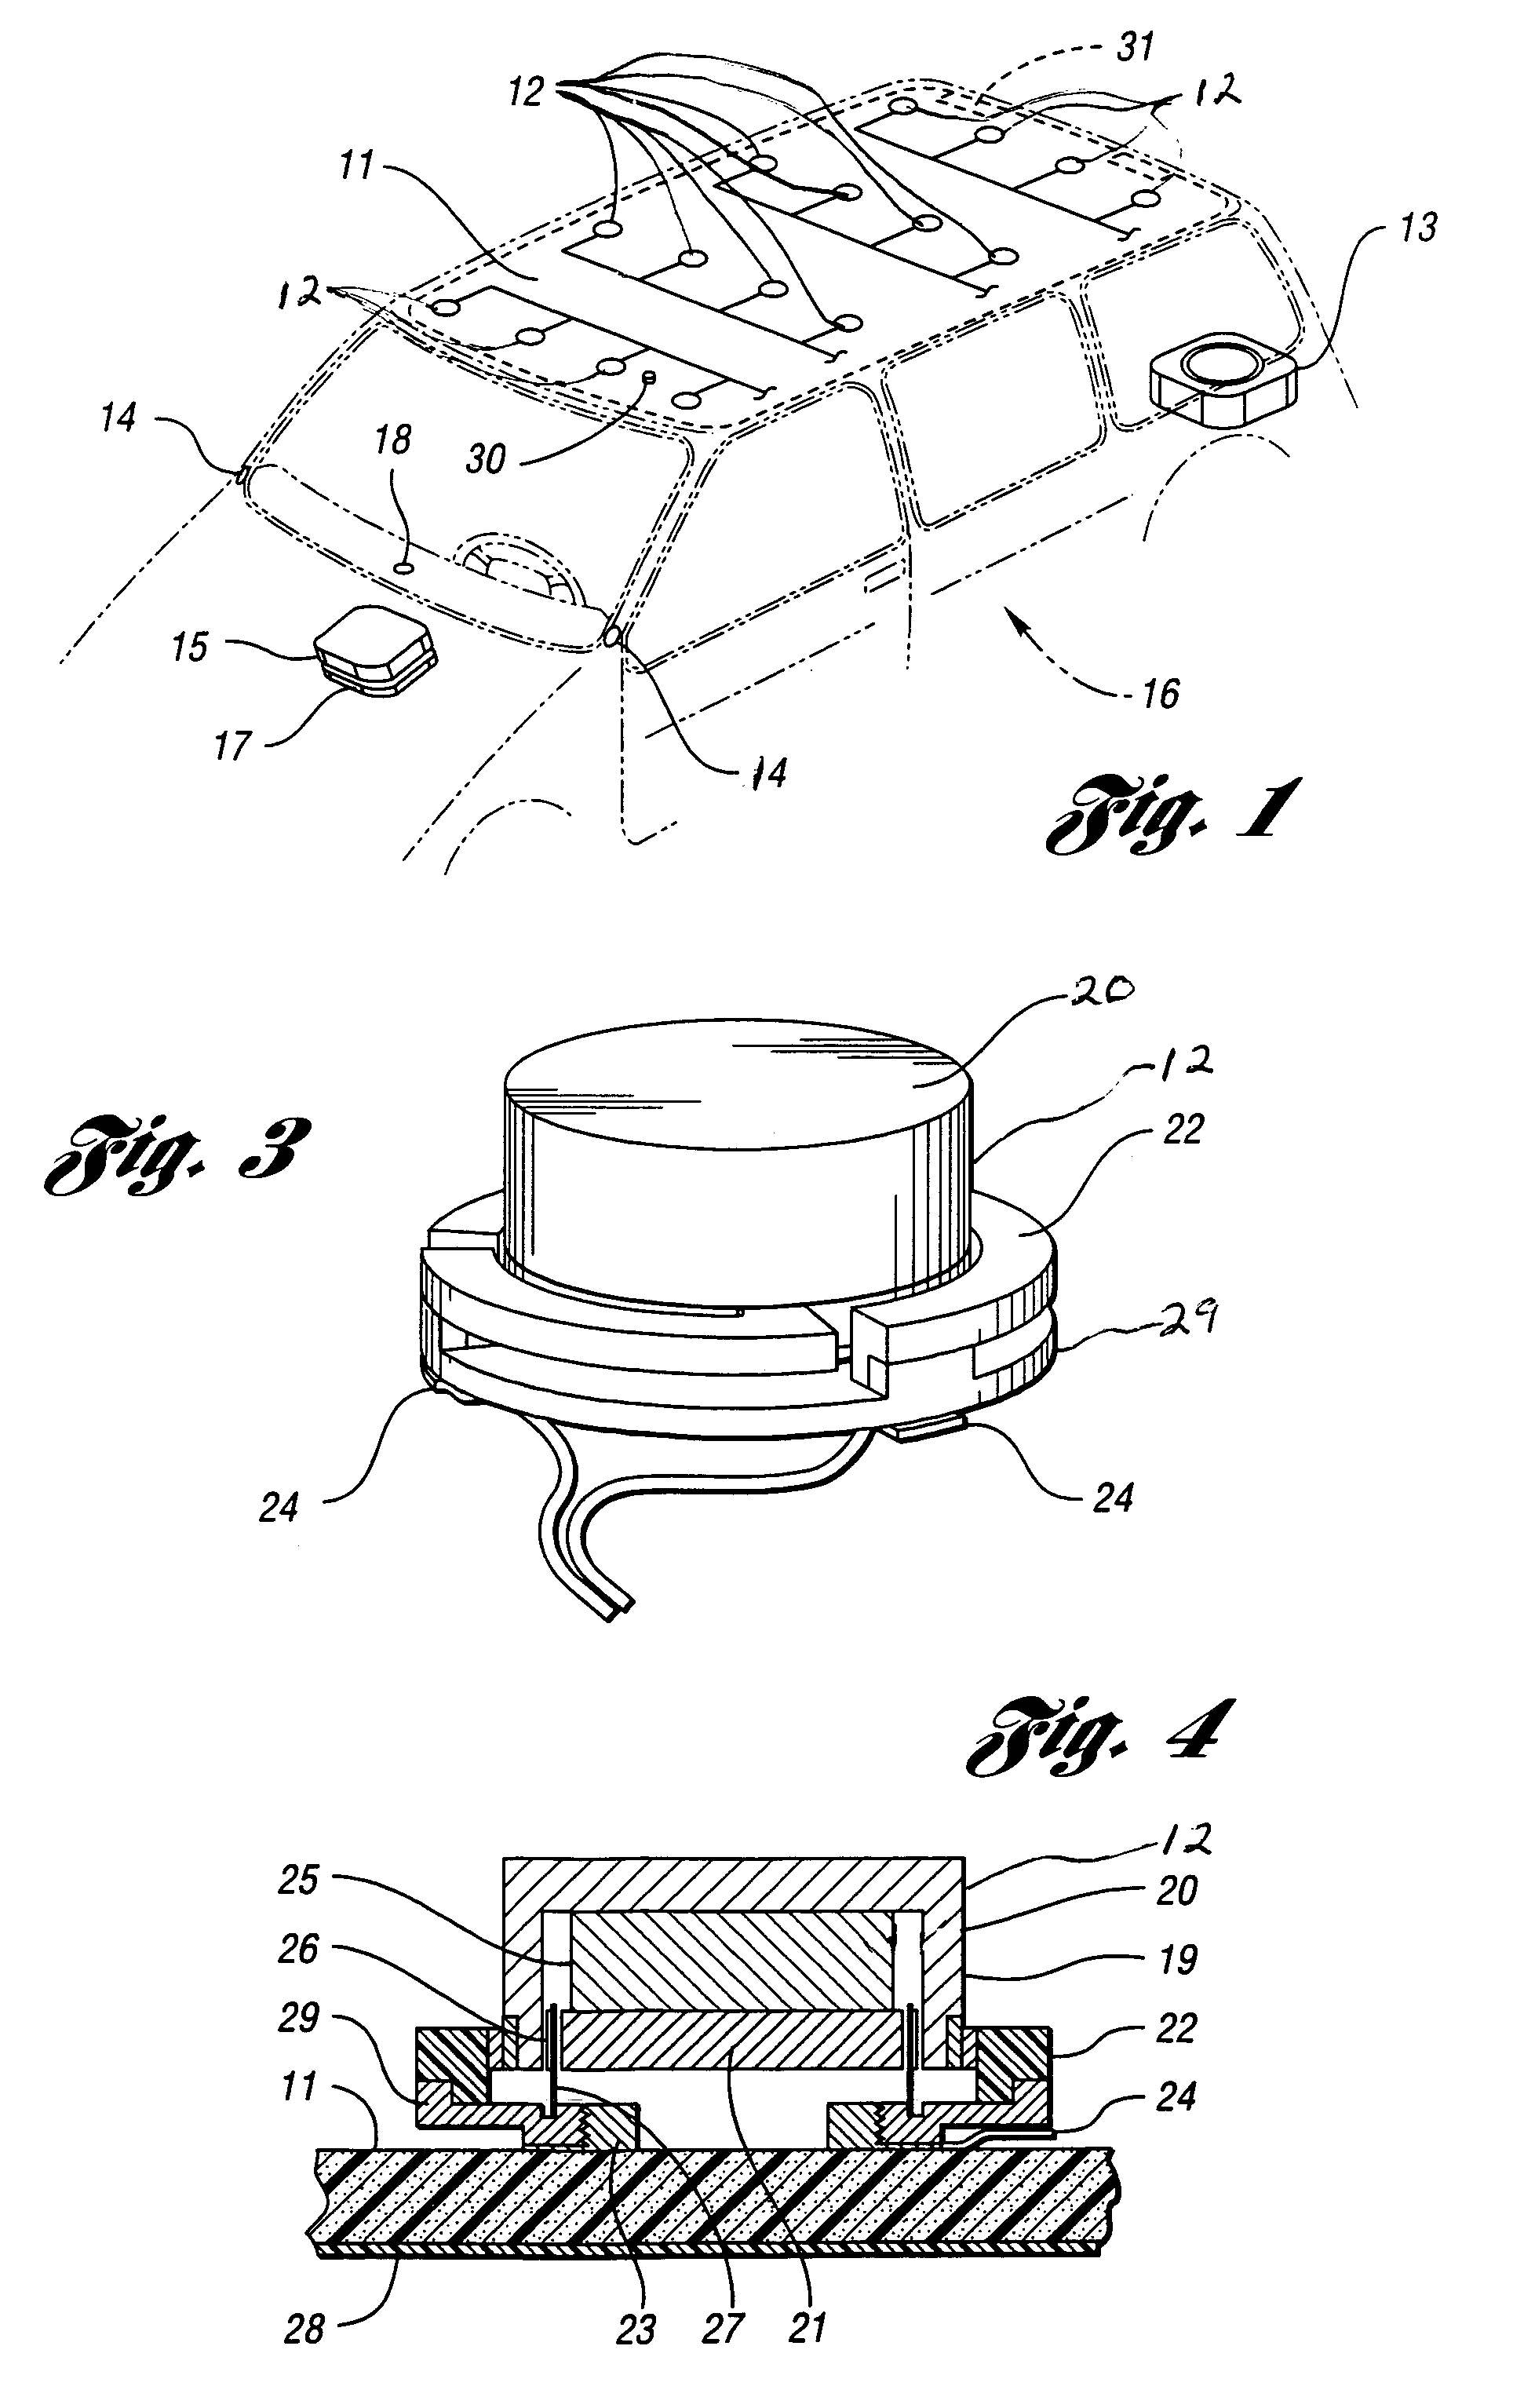 Vehicular audio system and electromagnetic transducer assembly for use therein